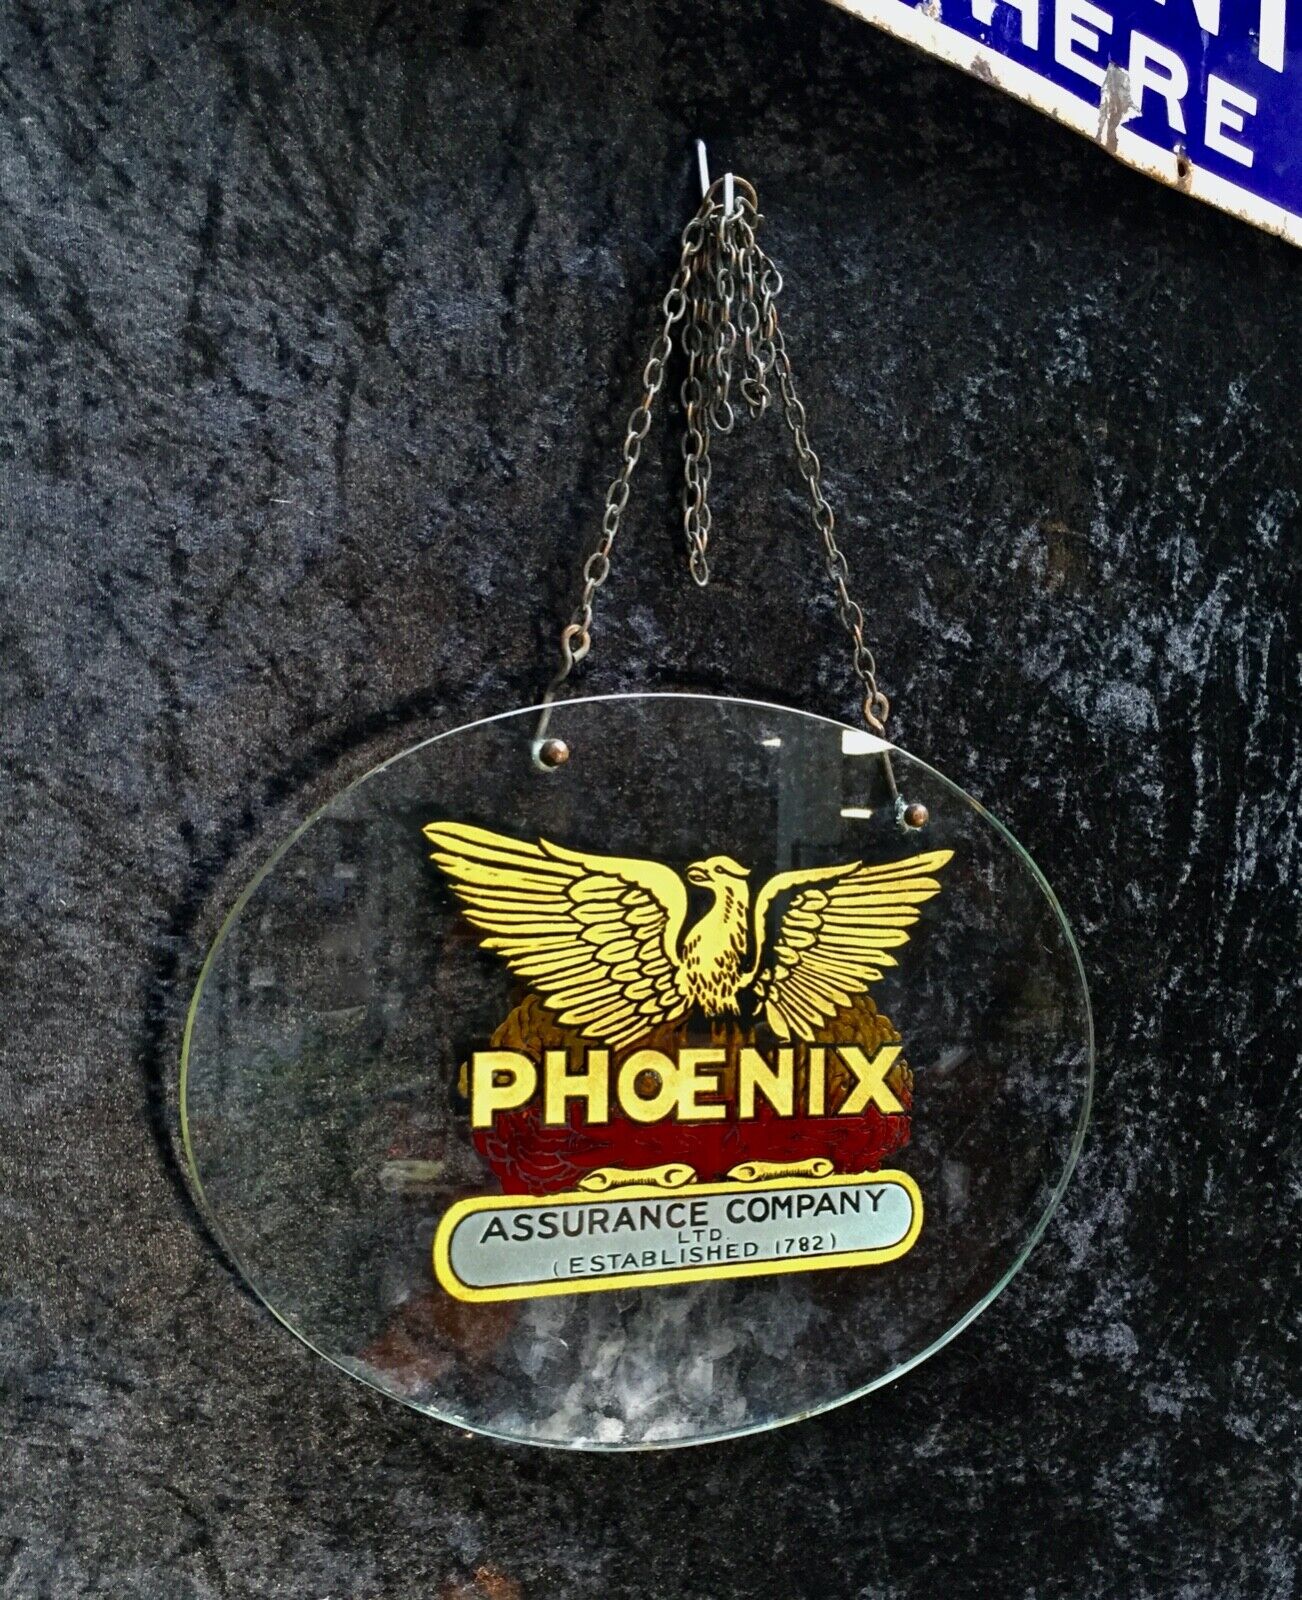 Antique Advertising - Vintage Glass Wall Sign for Phoenix Assurance Company ltd